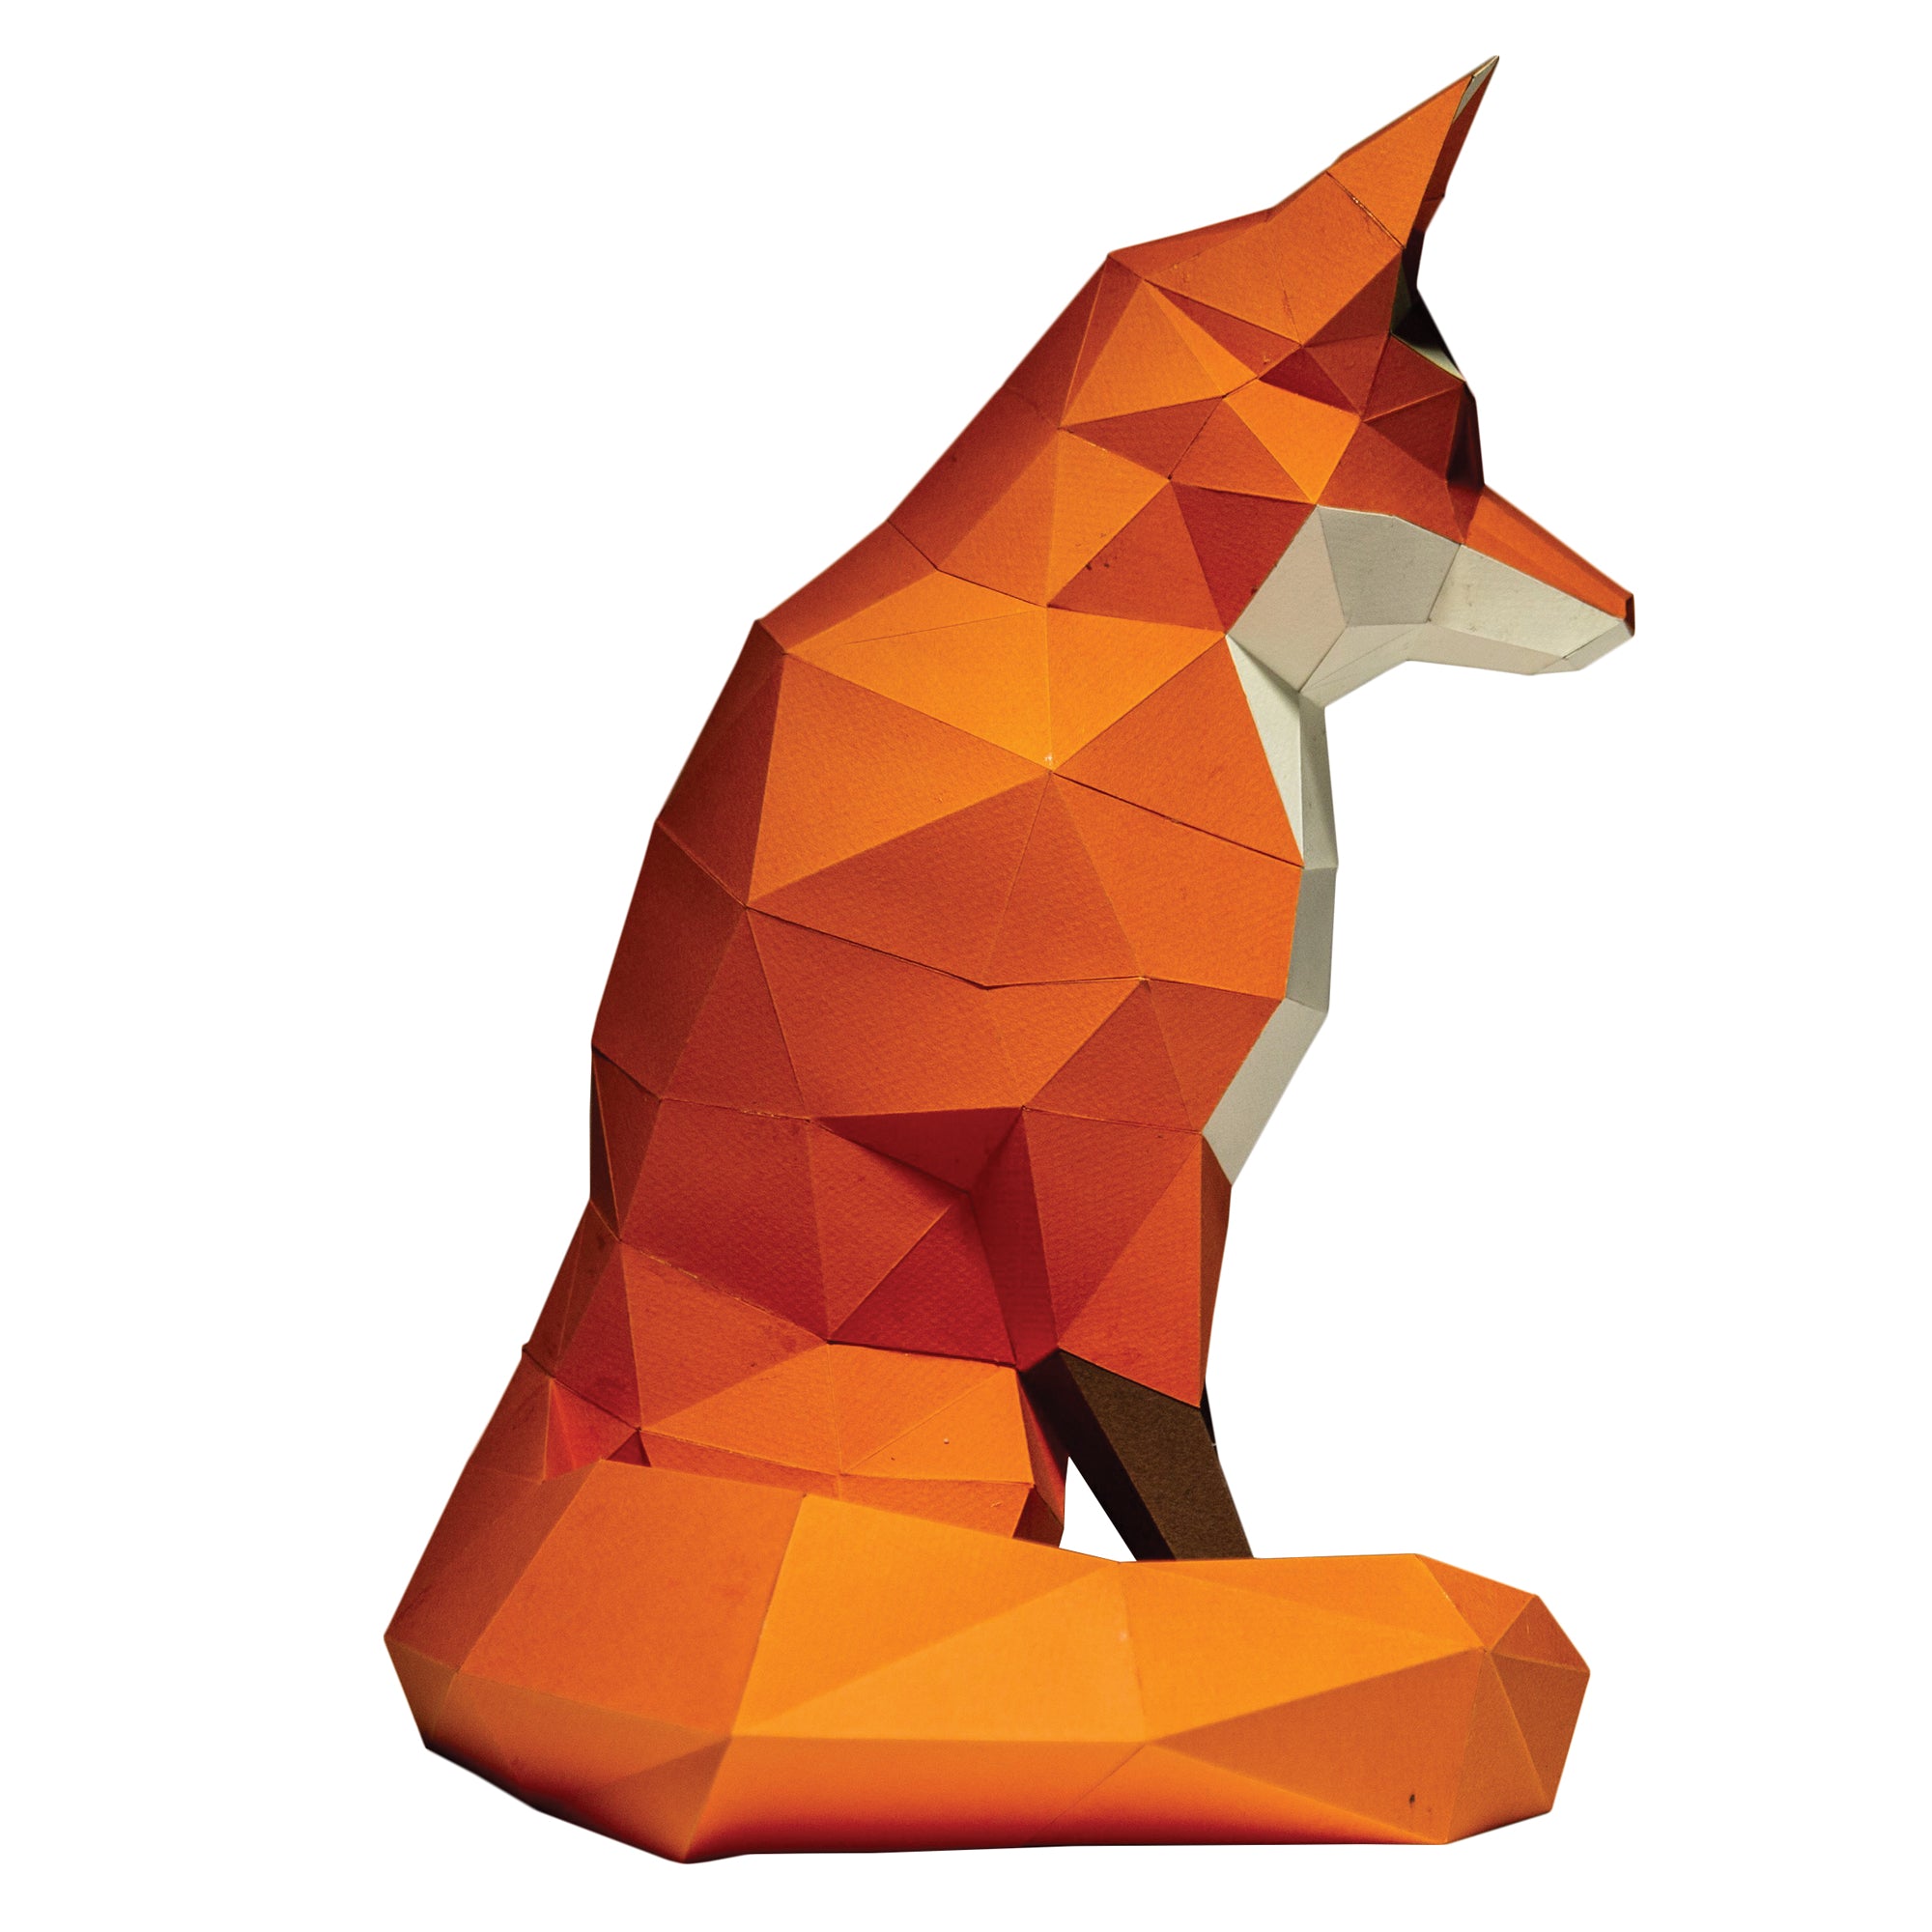 Side view of a Papercraft fox on a white background. Geometrical-shaped fox that is folded and cut paper pieces glued together. Fox is mainly a dark orange with black paws and a white chest and chin area.